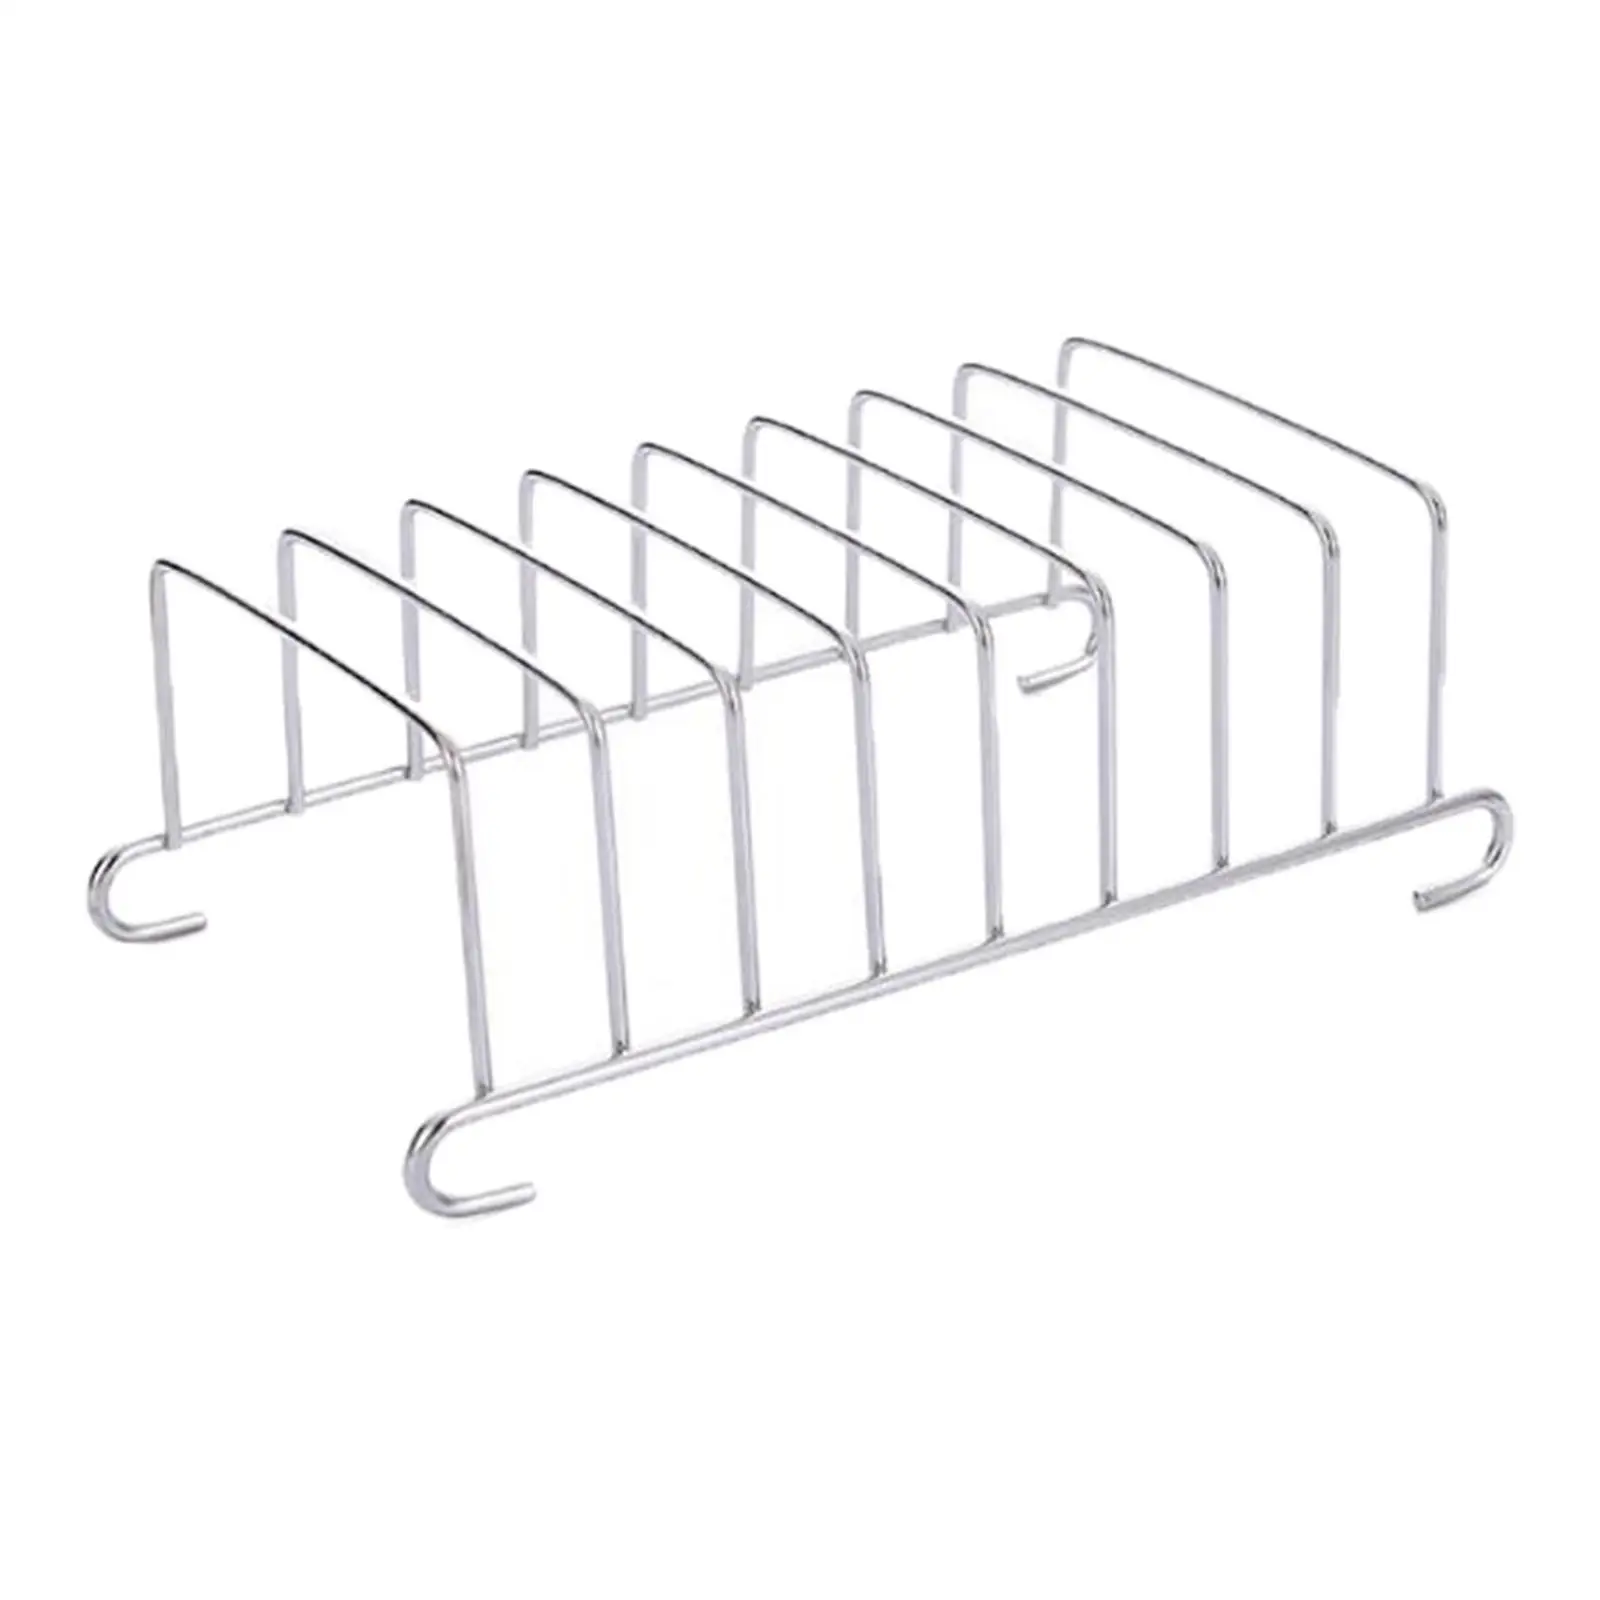 Stainless Food Display Stand Portable Storing Bread Bread Rack Toast Rack